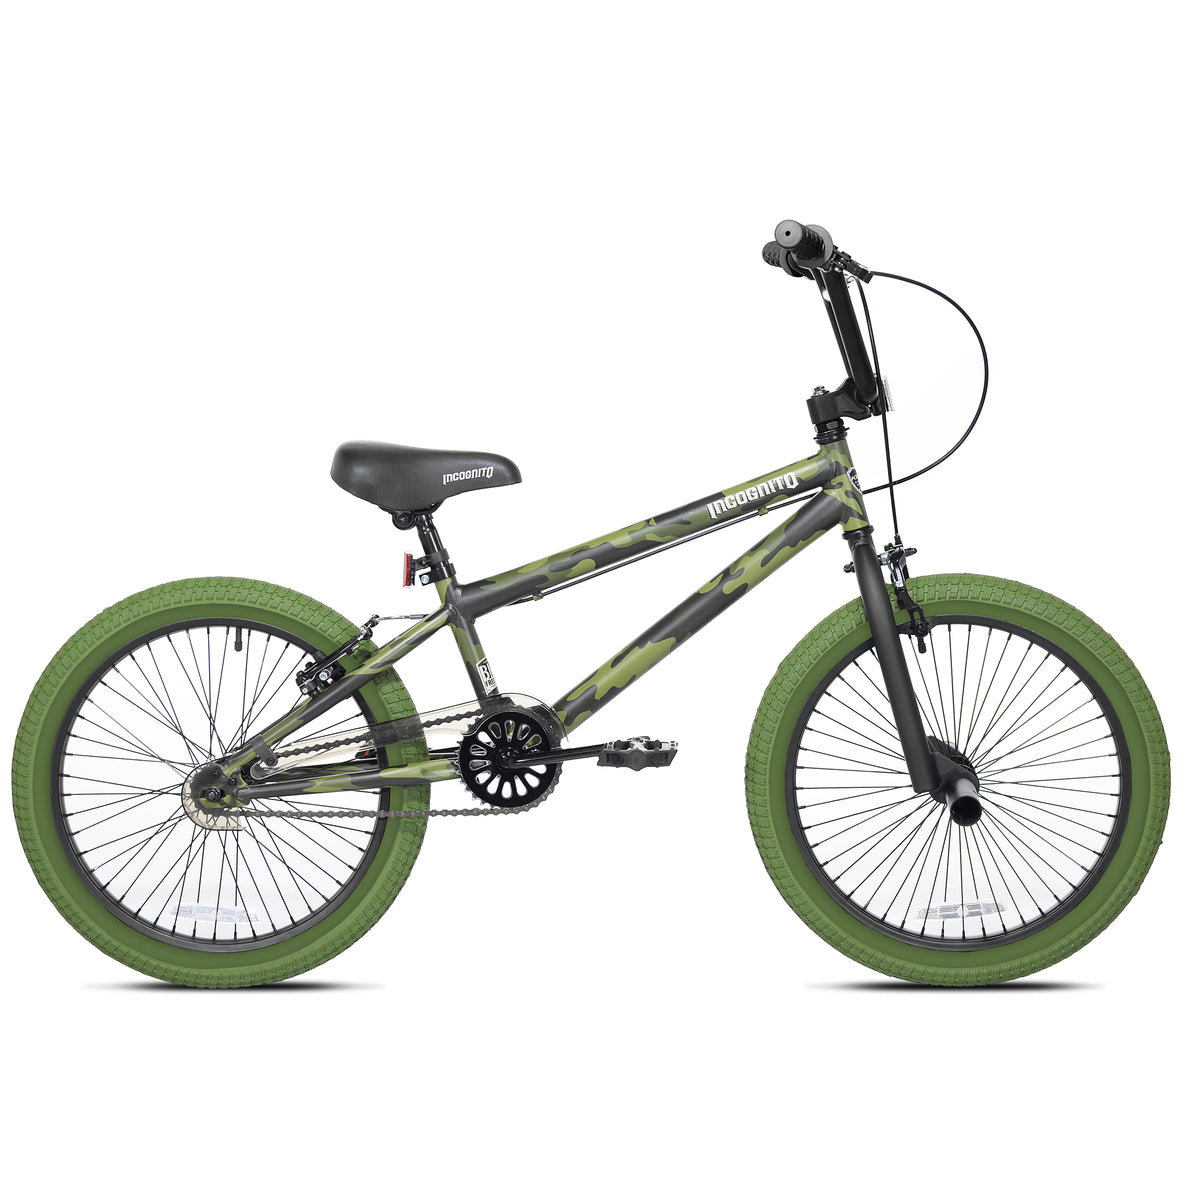 20" Kent Incognito | Bike for Kids Ages 7-13